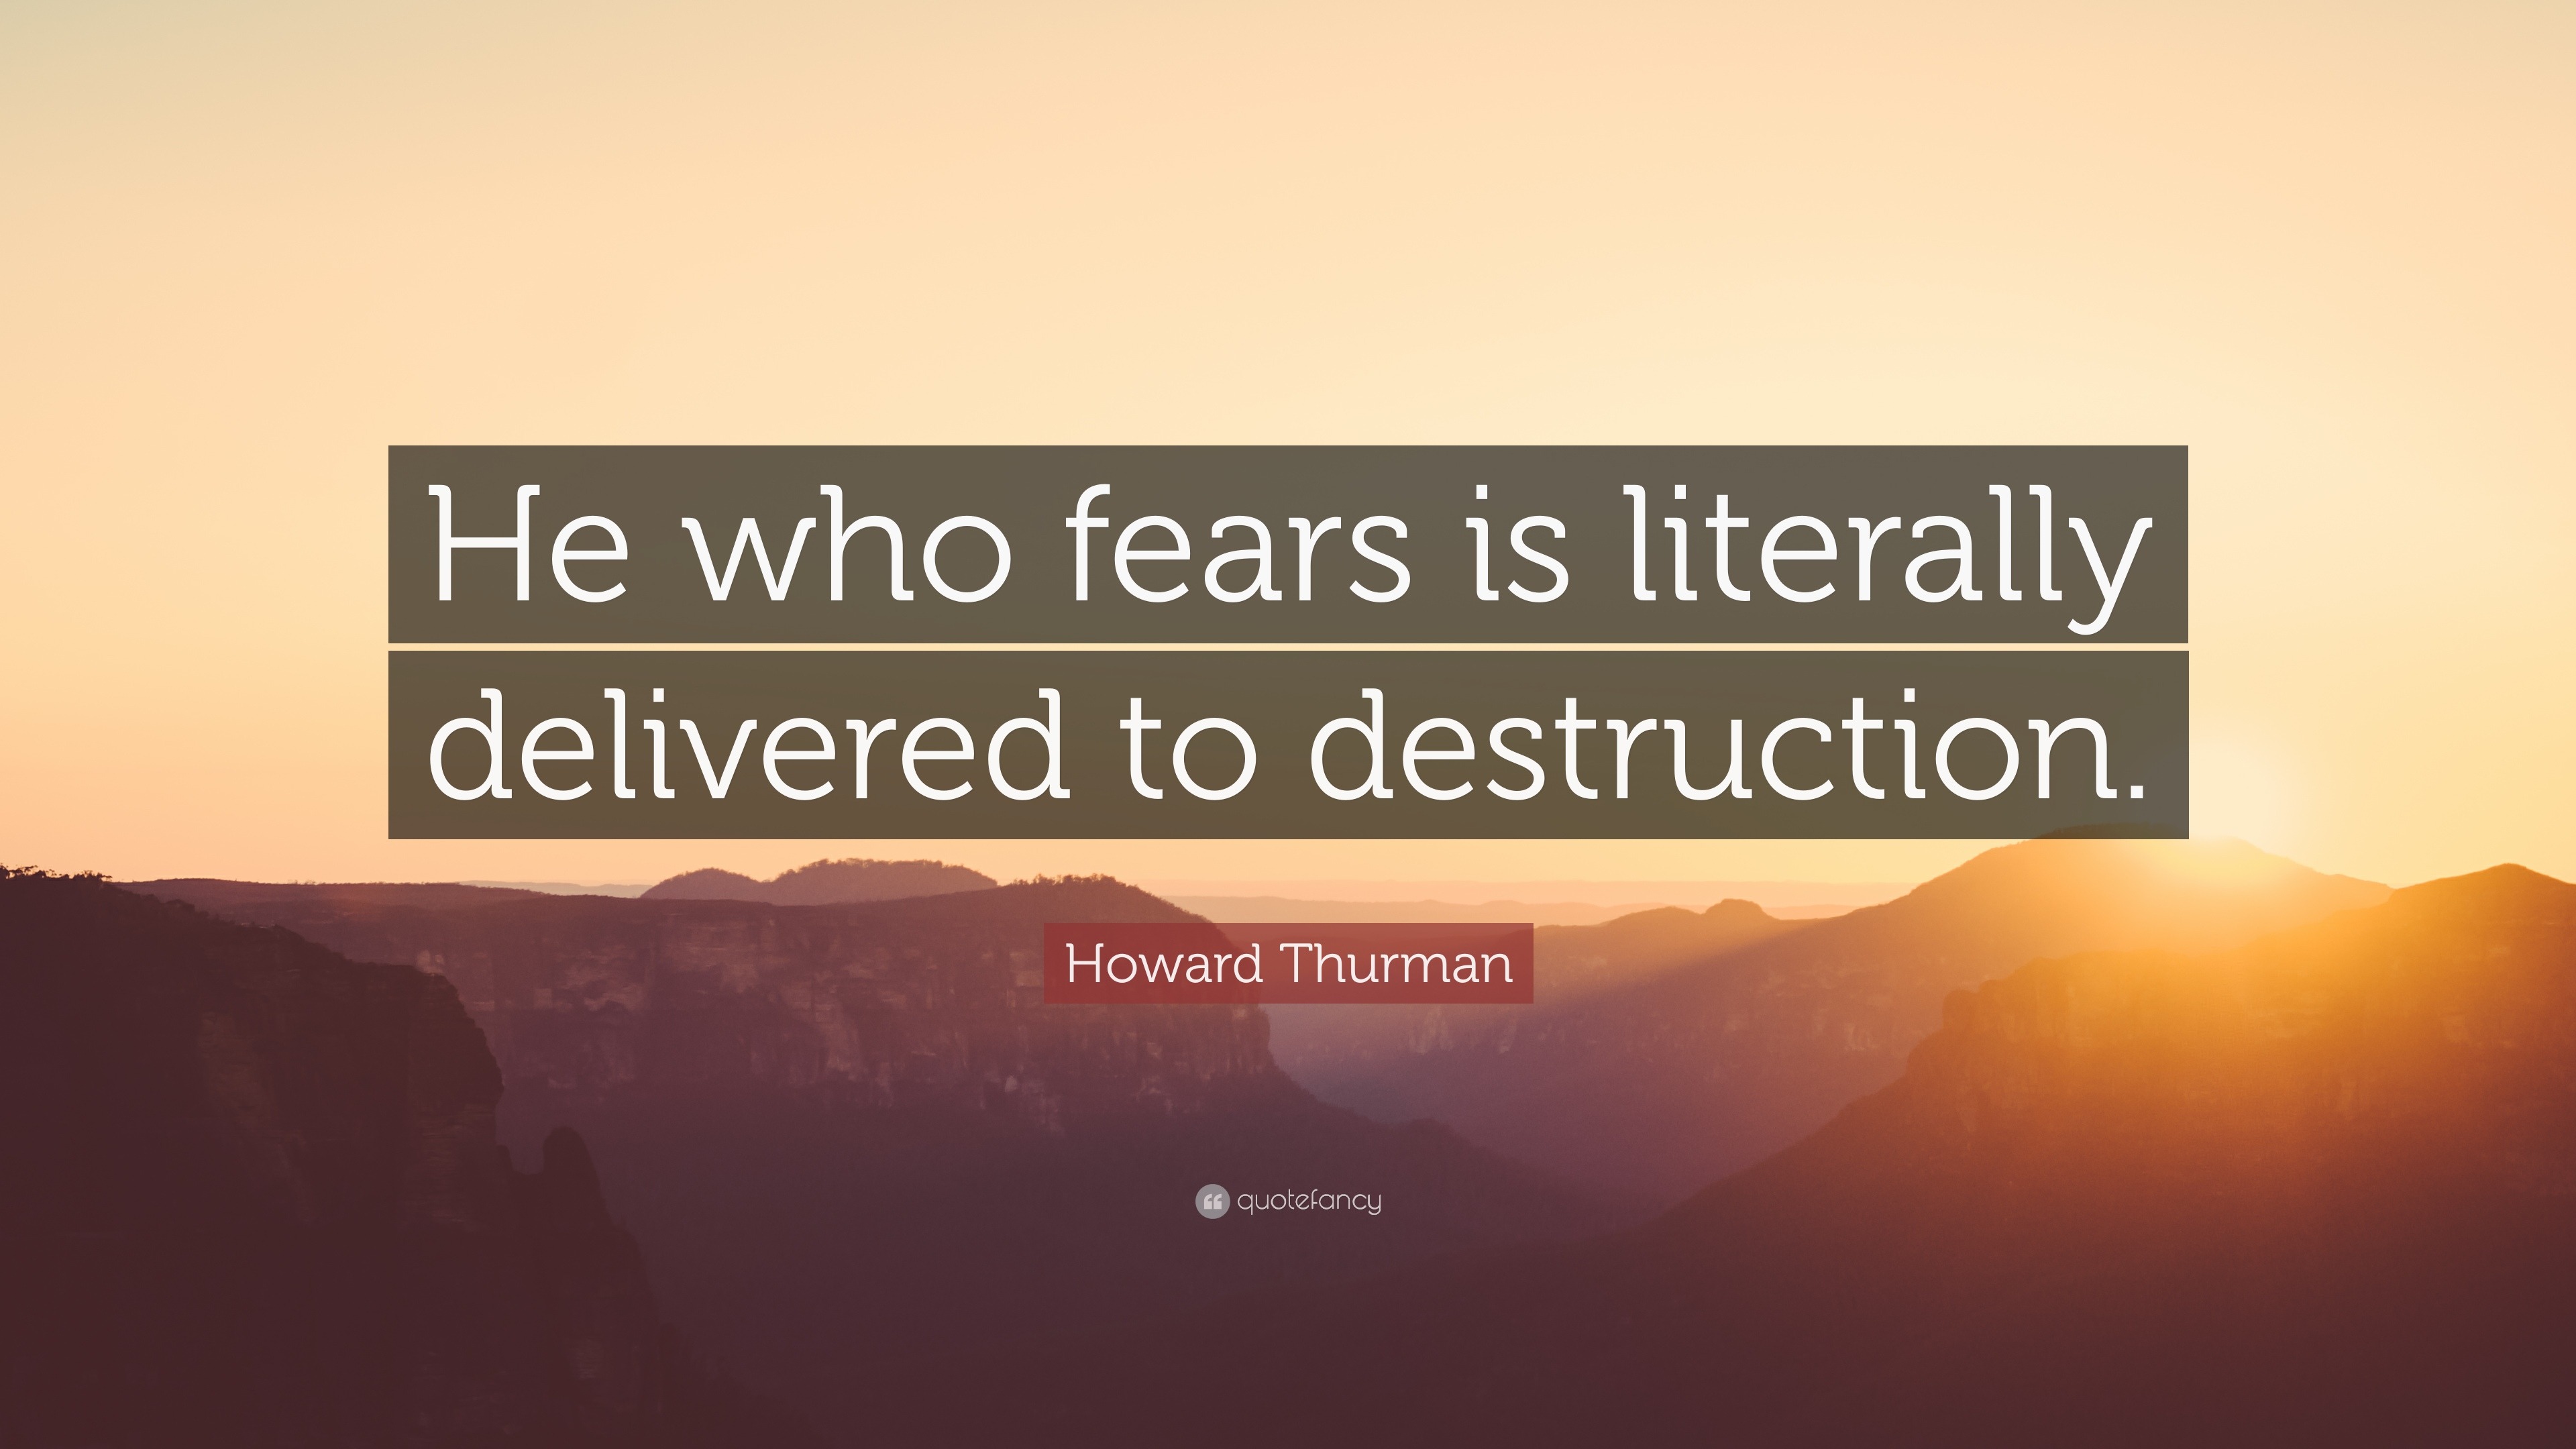 Howard Thurman Quotes (36 wallpapers) - Quotefancy